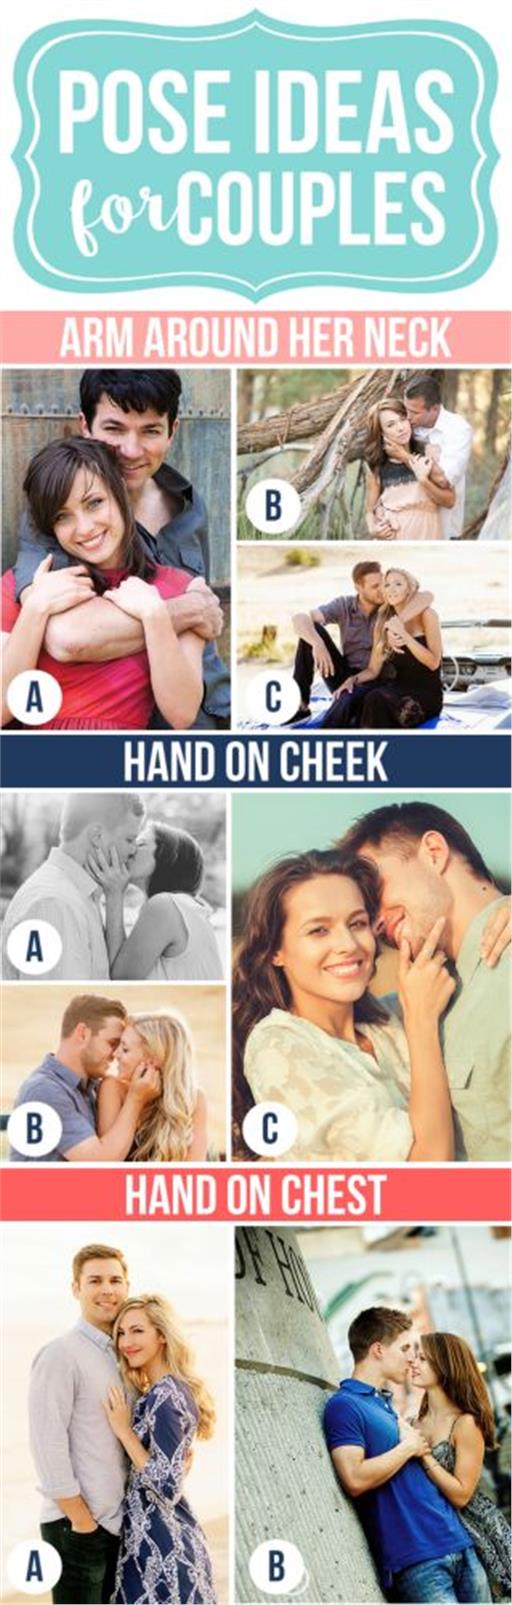 27396766_Pose_Ideas_for_Couples_1.limghandler